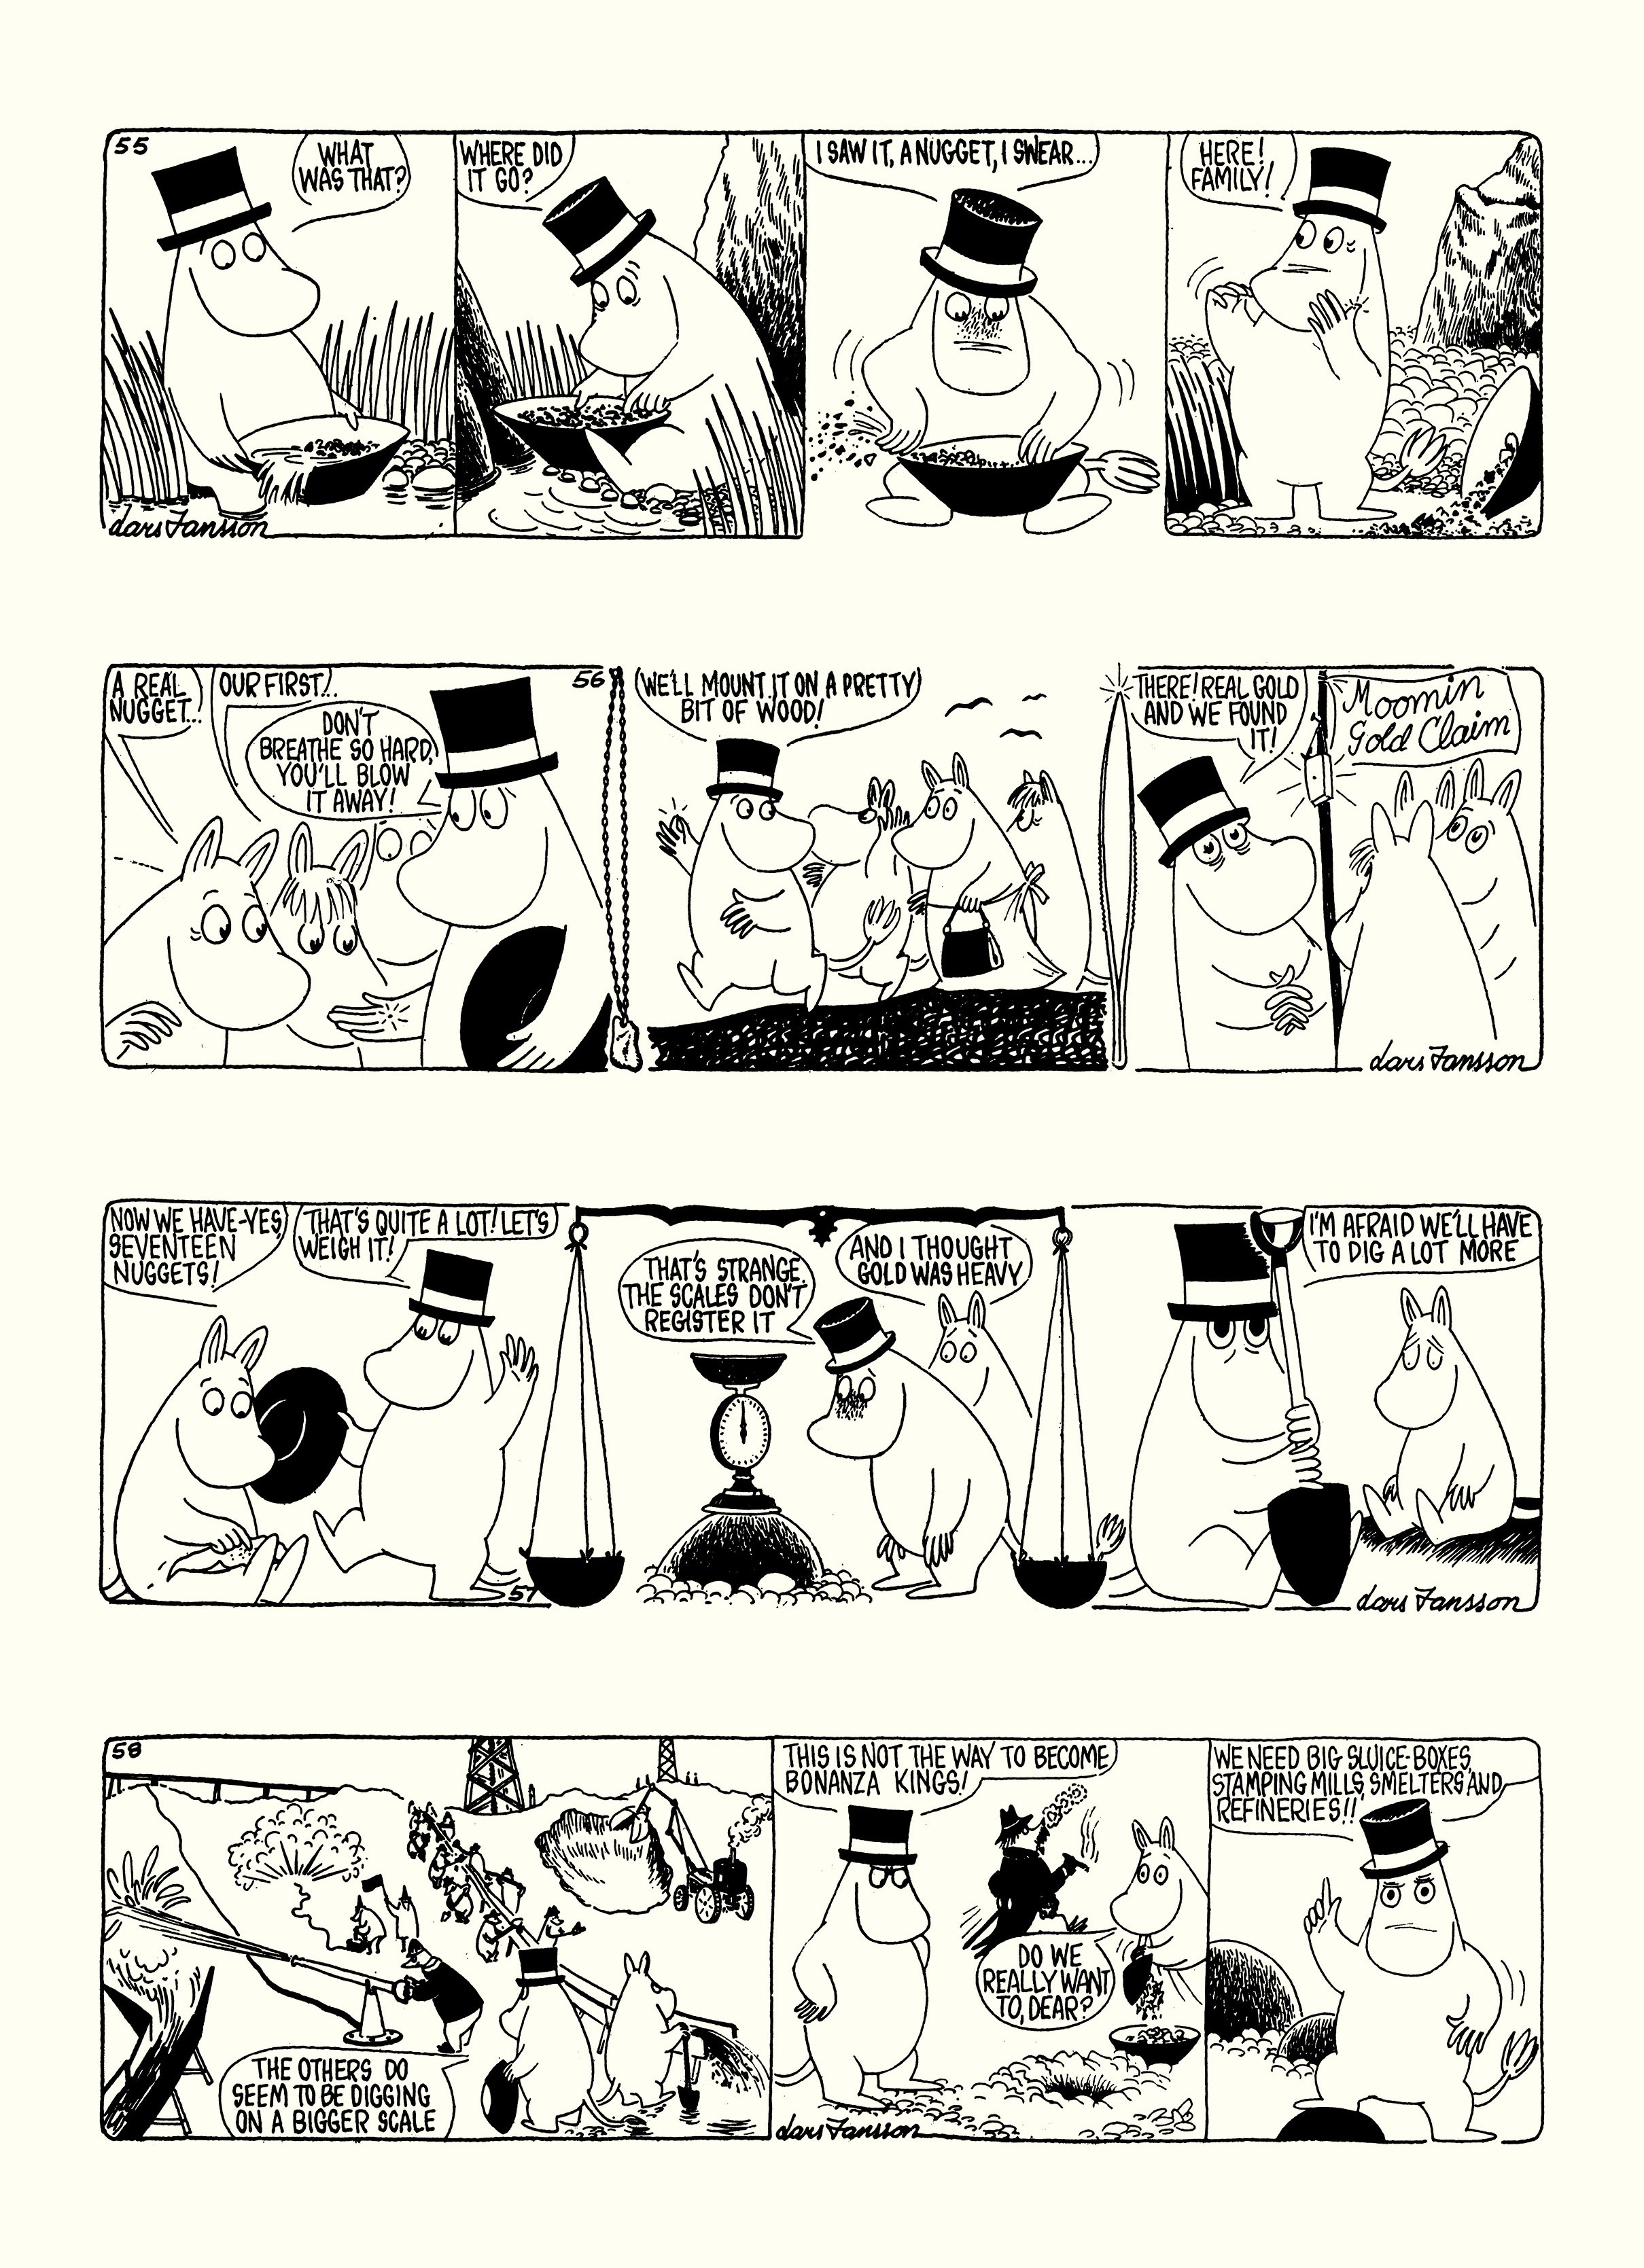 Read online Moomin: The Complete Lars Jansson Comic Strip comic -  Issue # TPB 7 - 83